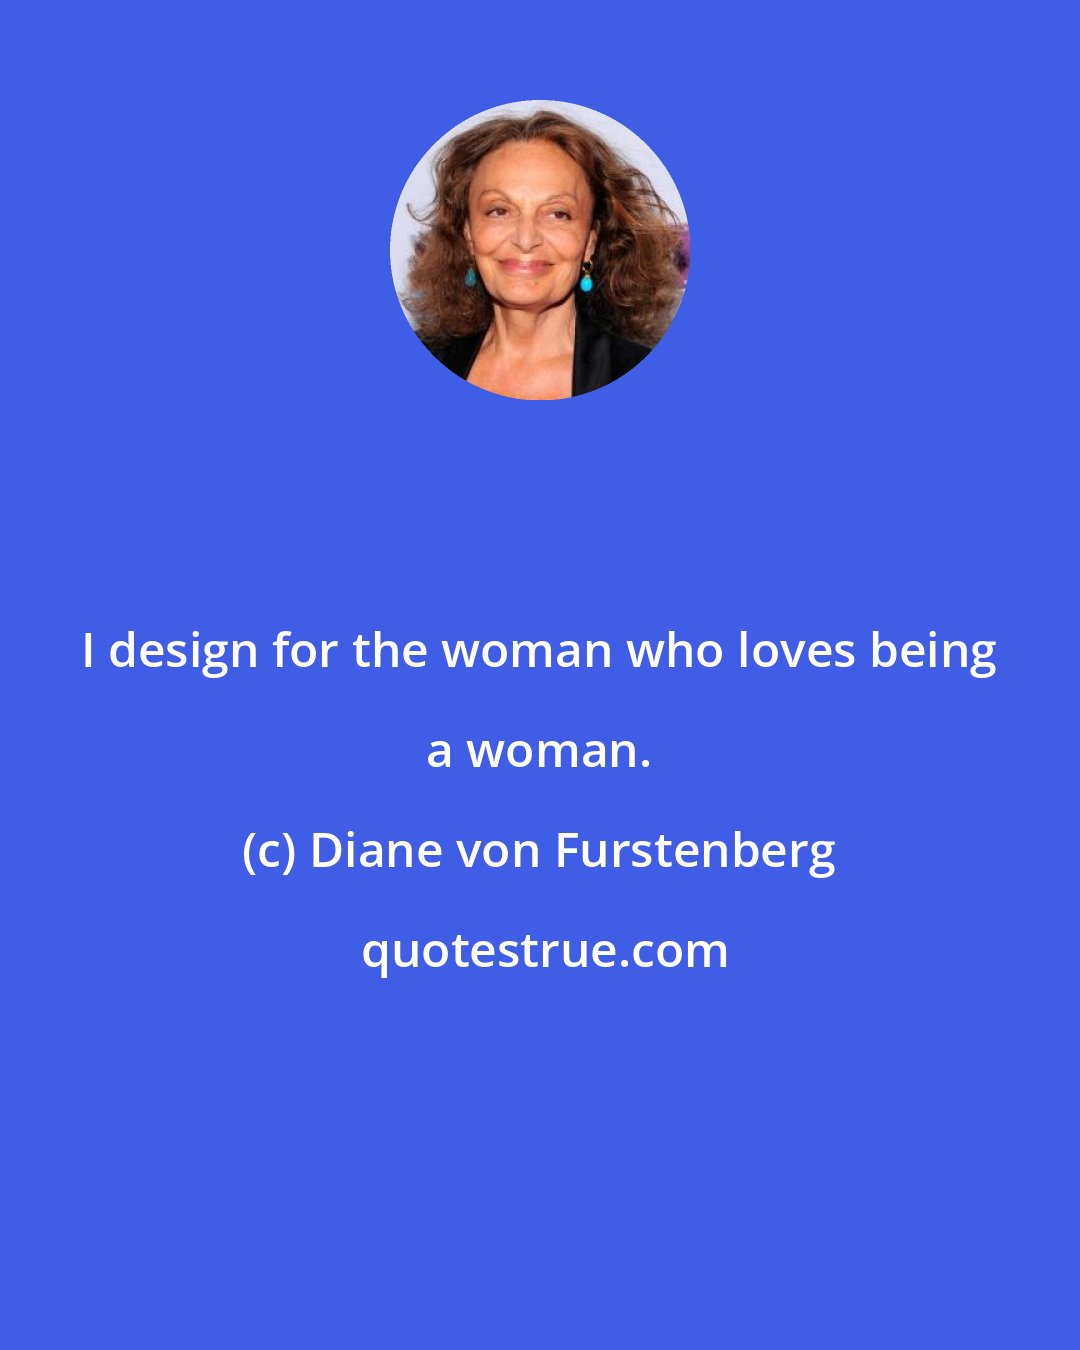 Diane von Furstenberg: I design for the woman who loves being a woman.